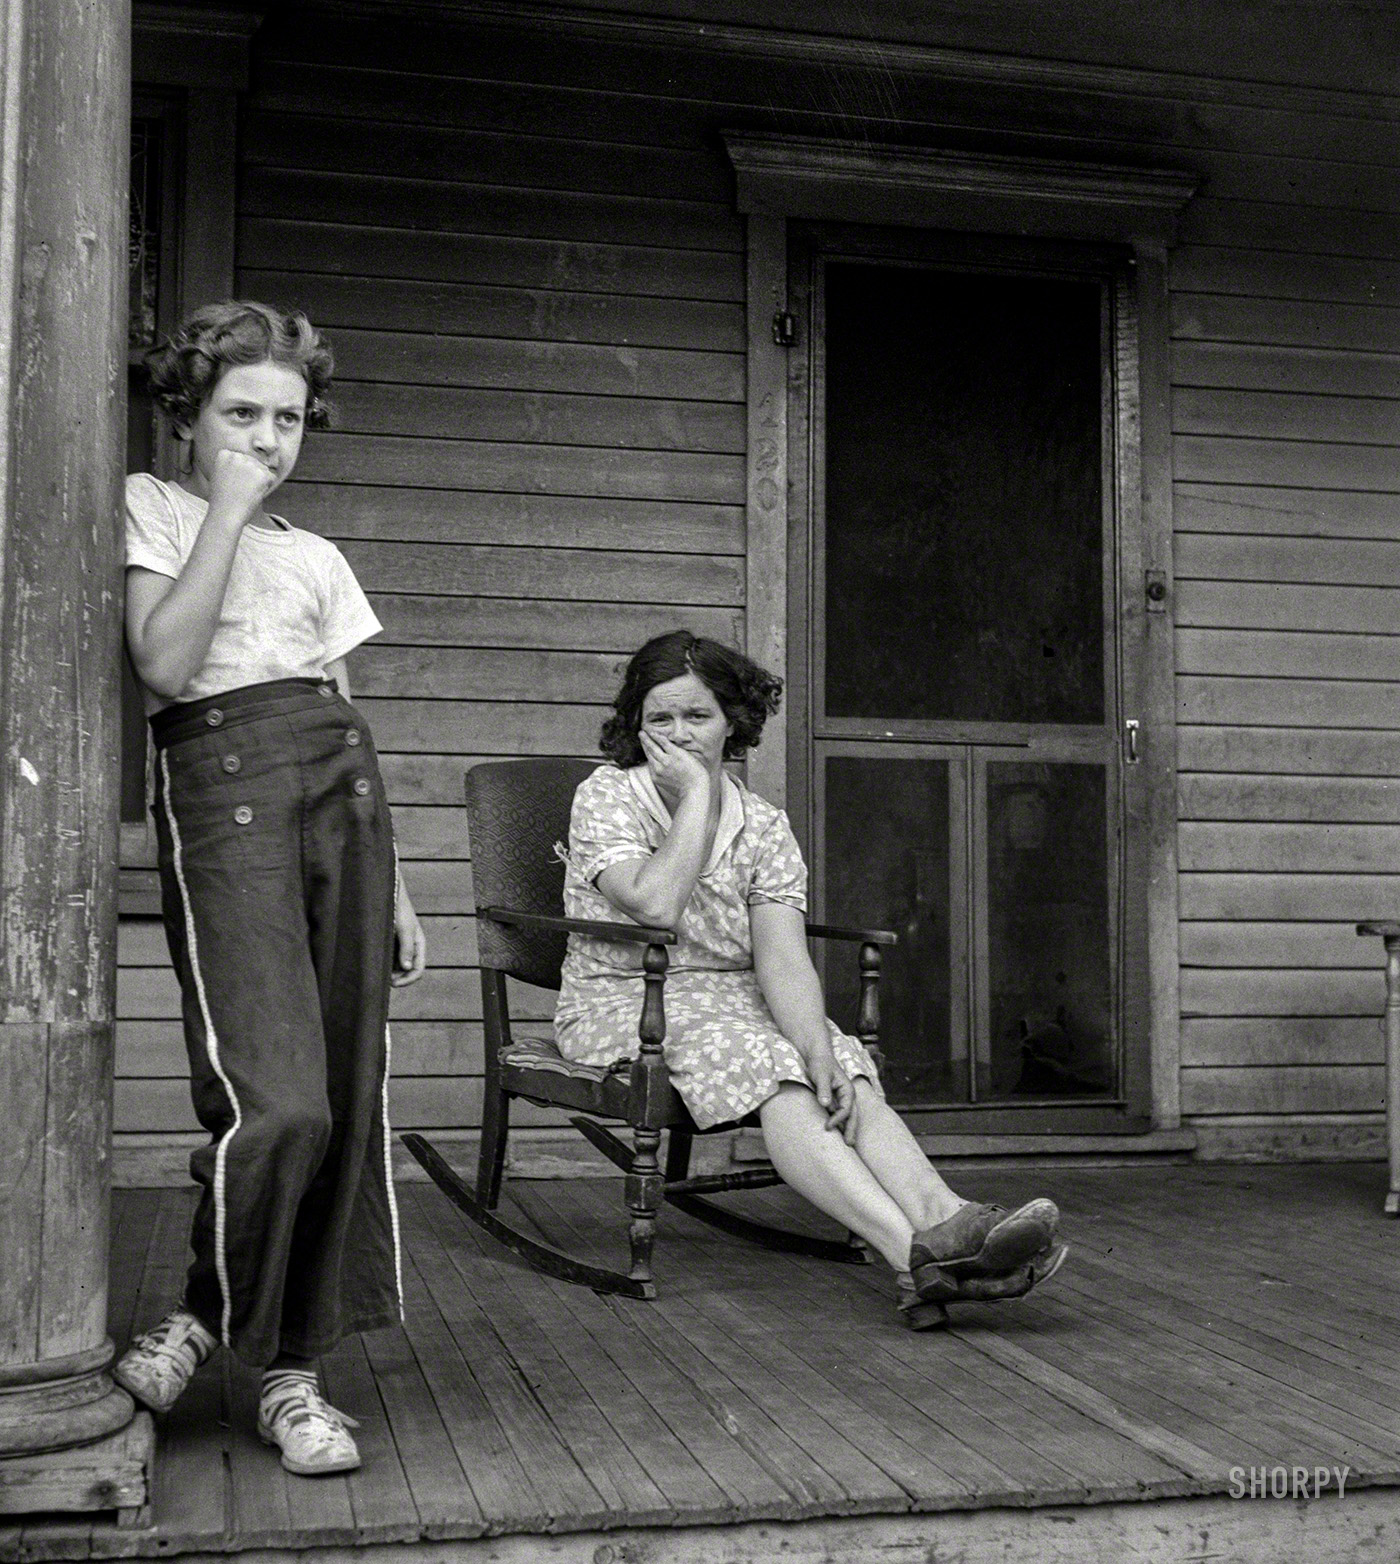 August 1940. "Women in Upper Mauch Chunk, Pennsylvania." Medium-format negative by Jack Delano for the Resettlement Administration. View full size.